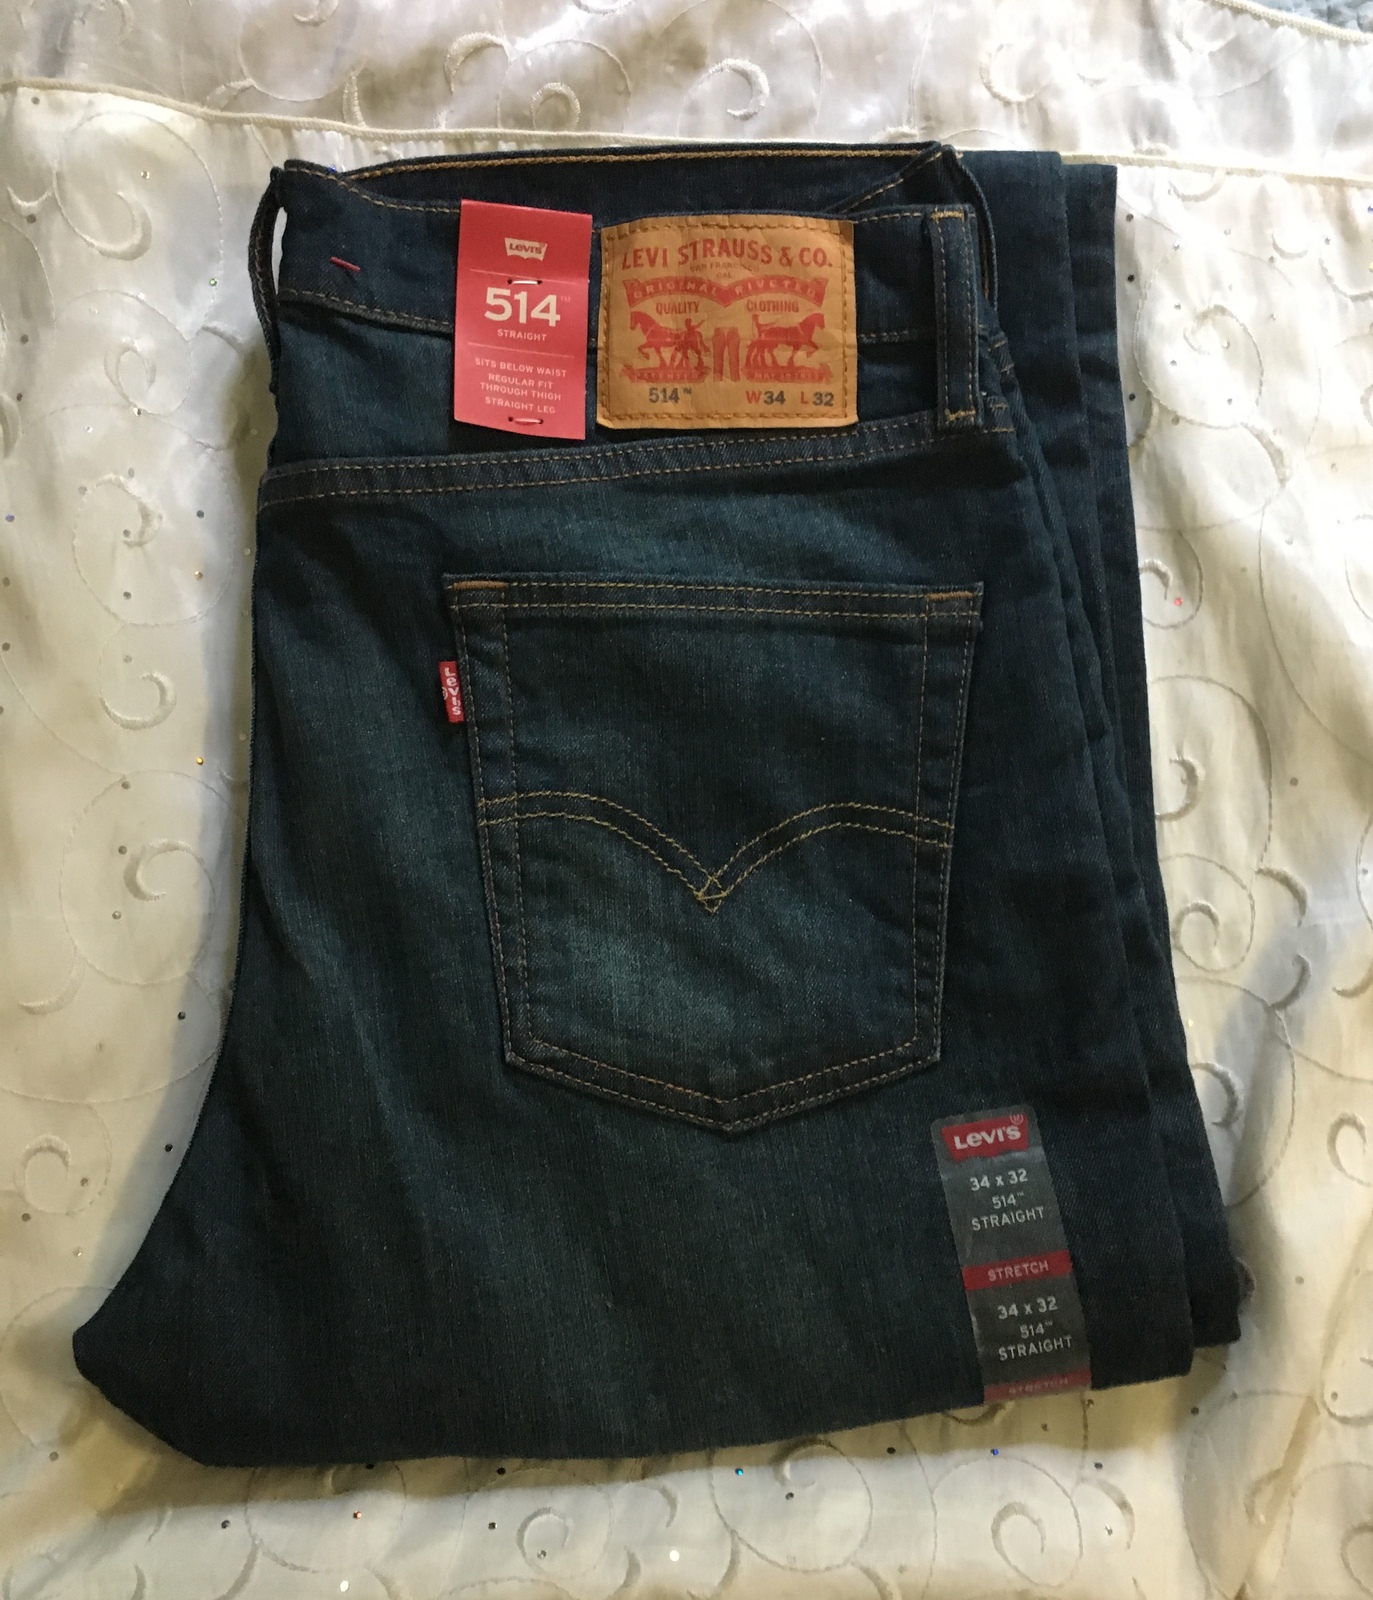 Levi's Mens 514 Straight Fit Jean Size 34-32 - Jeans